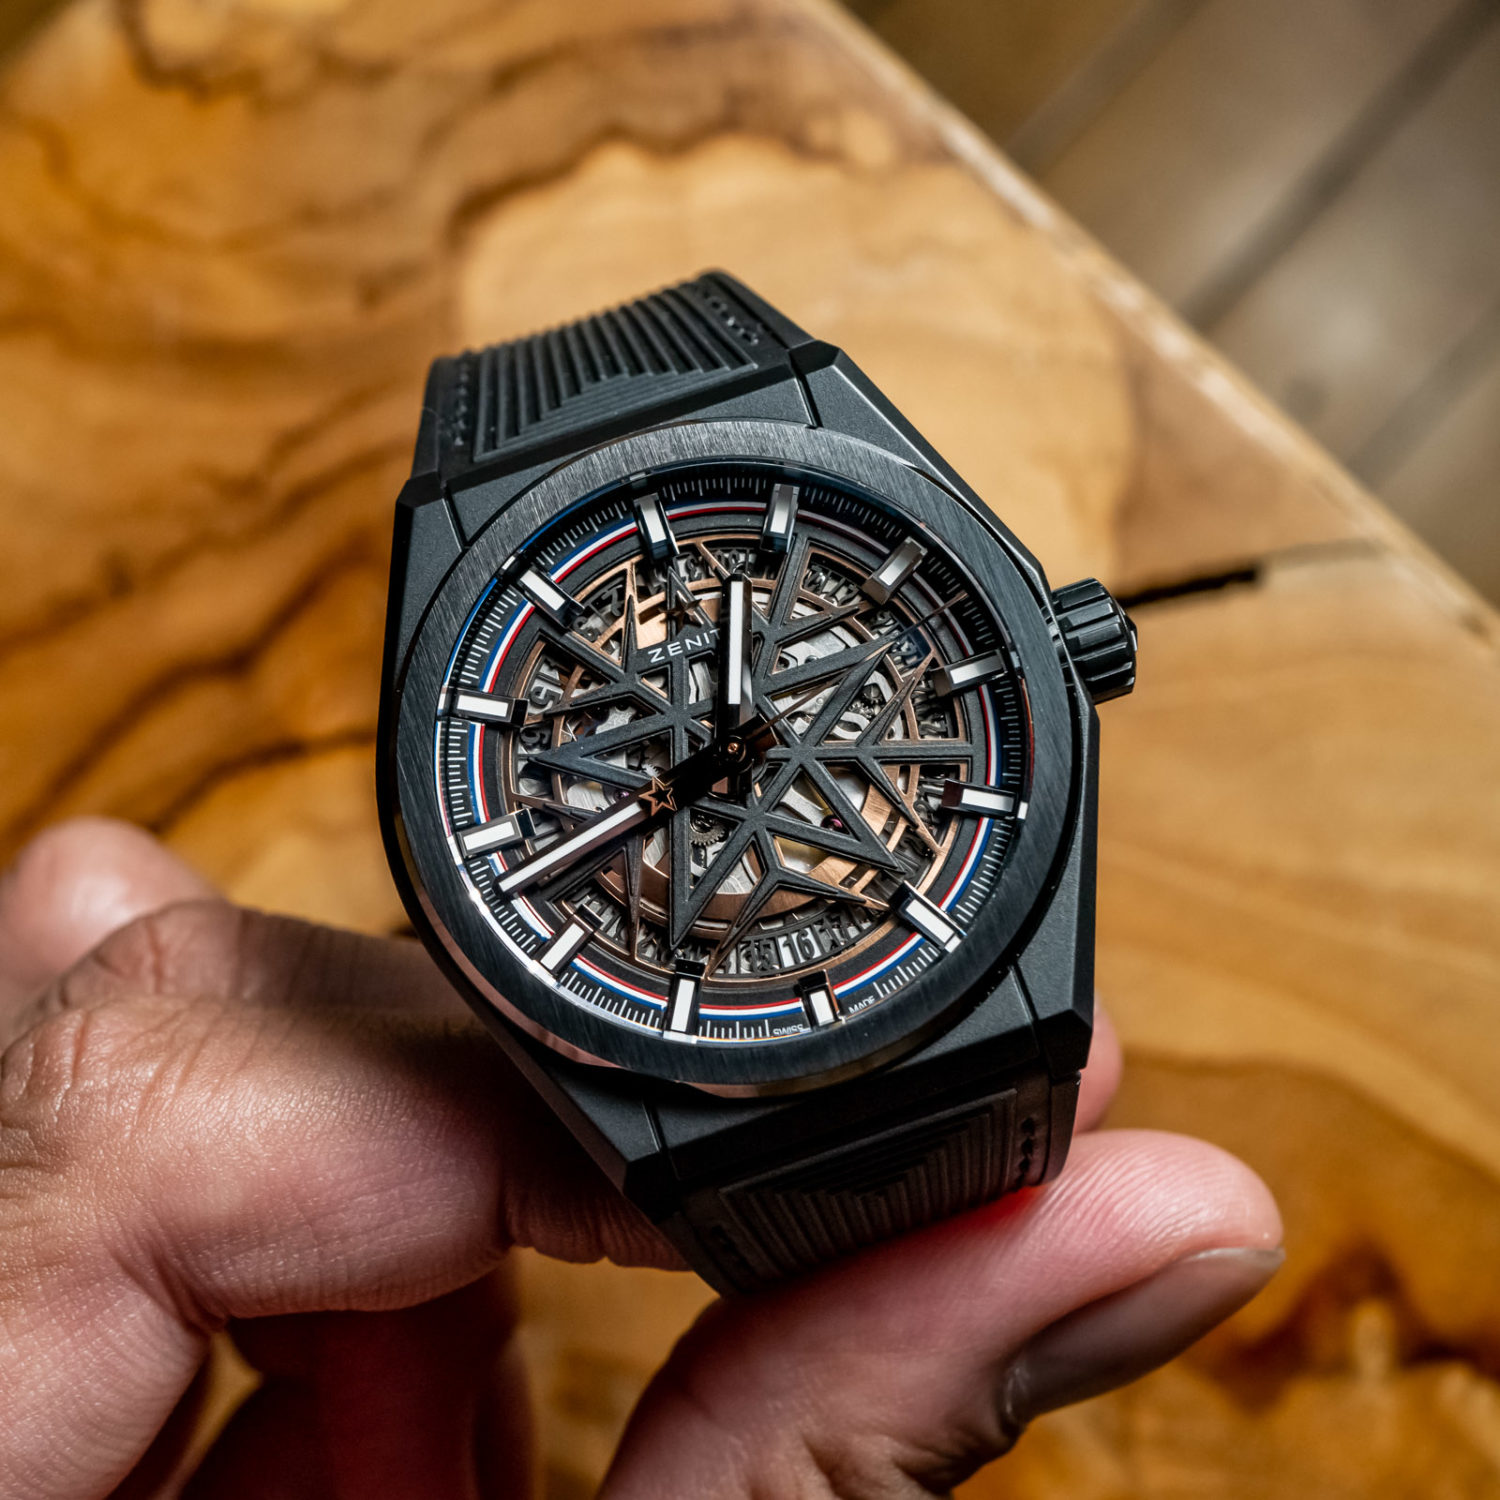 Zenith Defy Classic Ceramic - the good, the bad and the skeleton